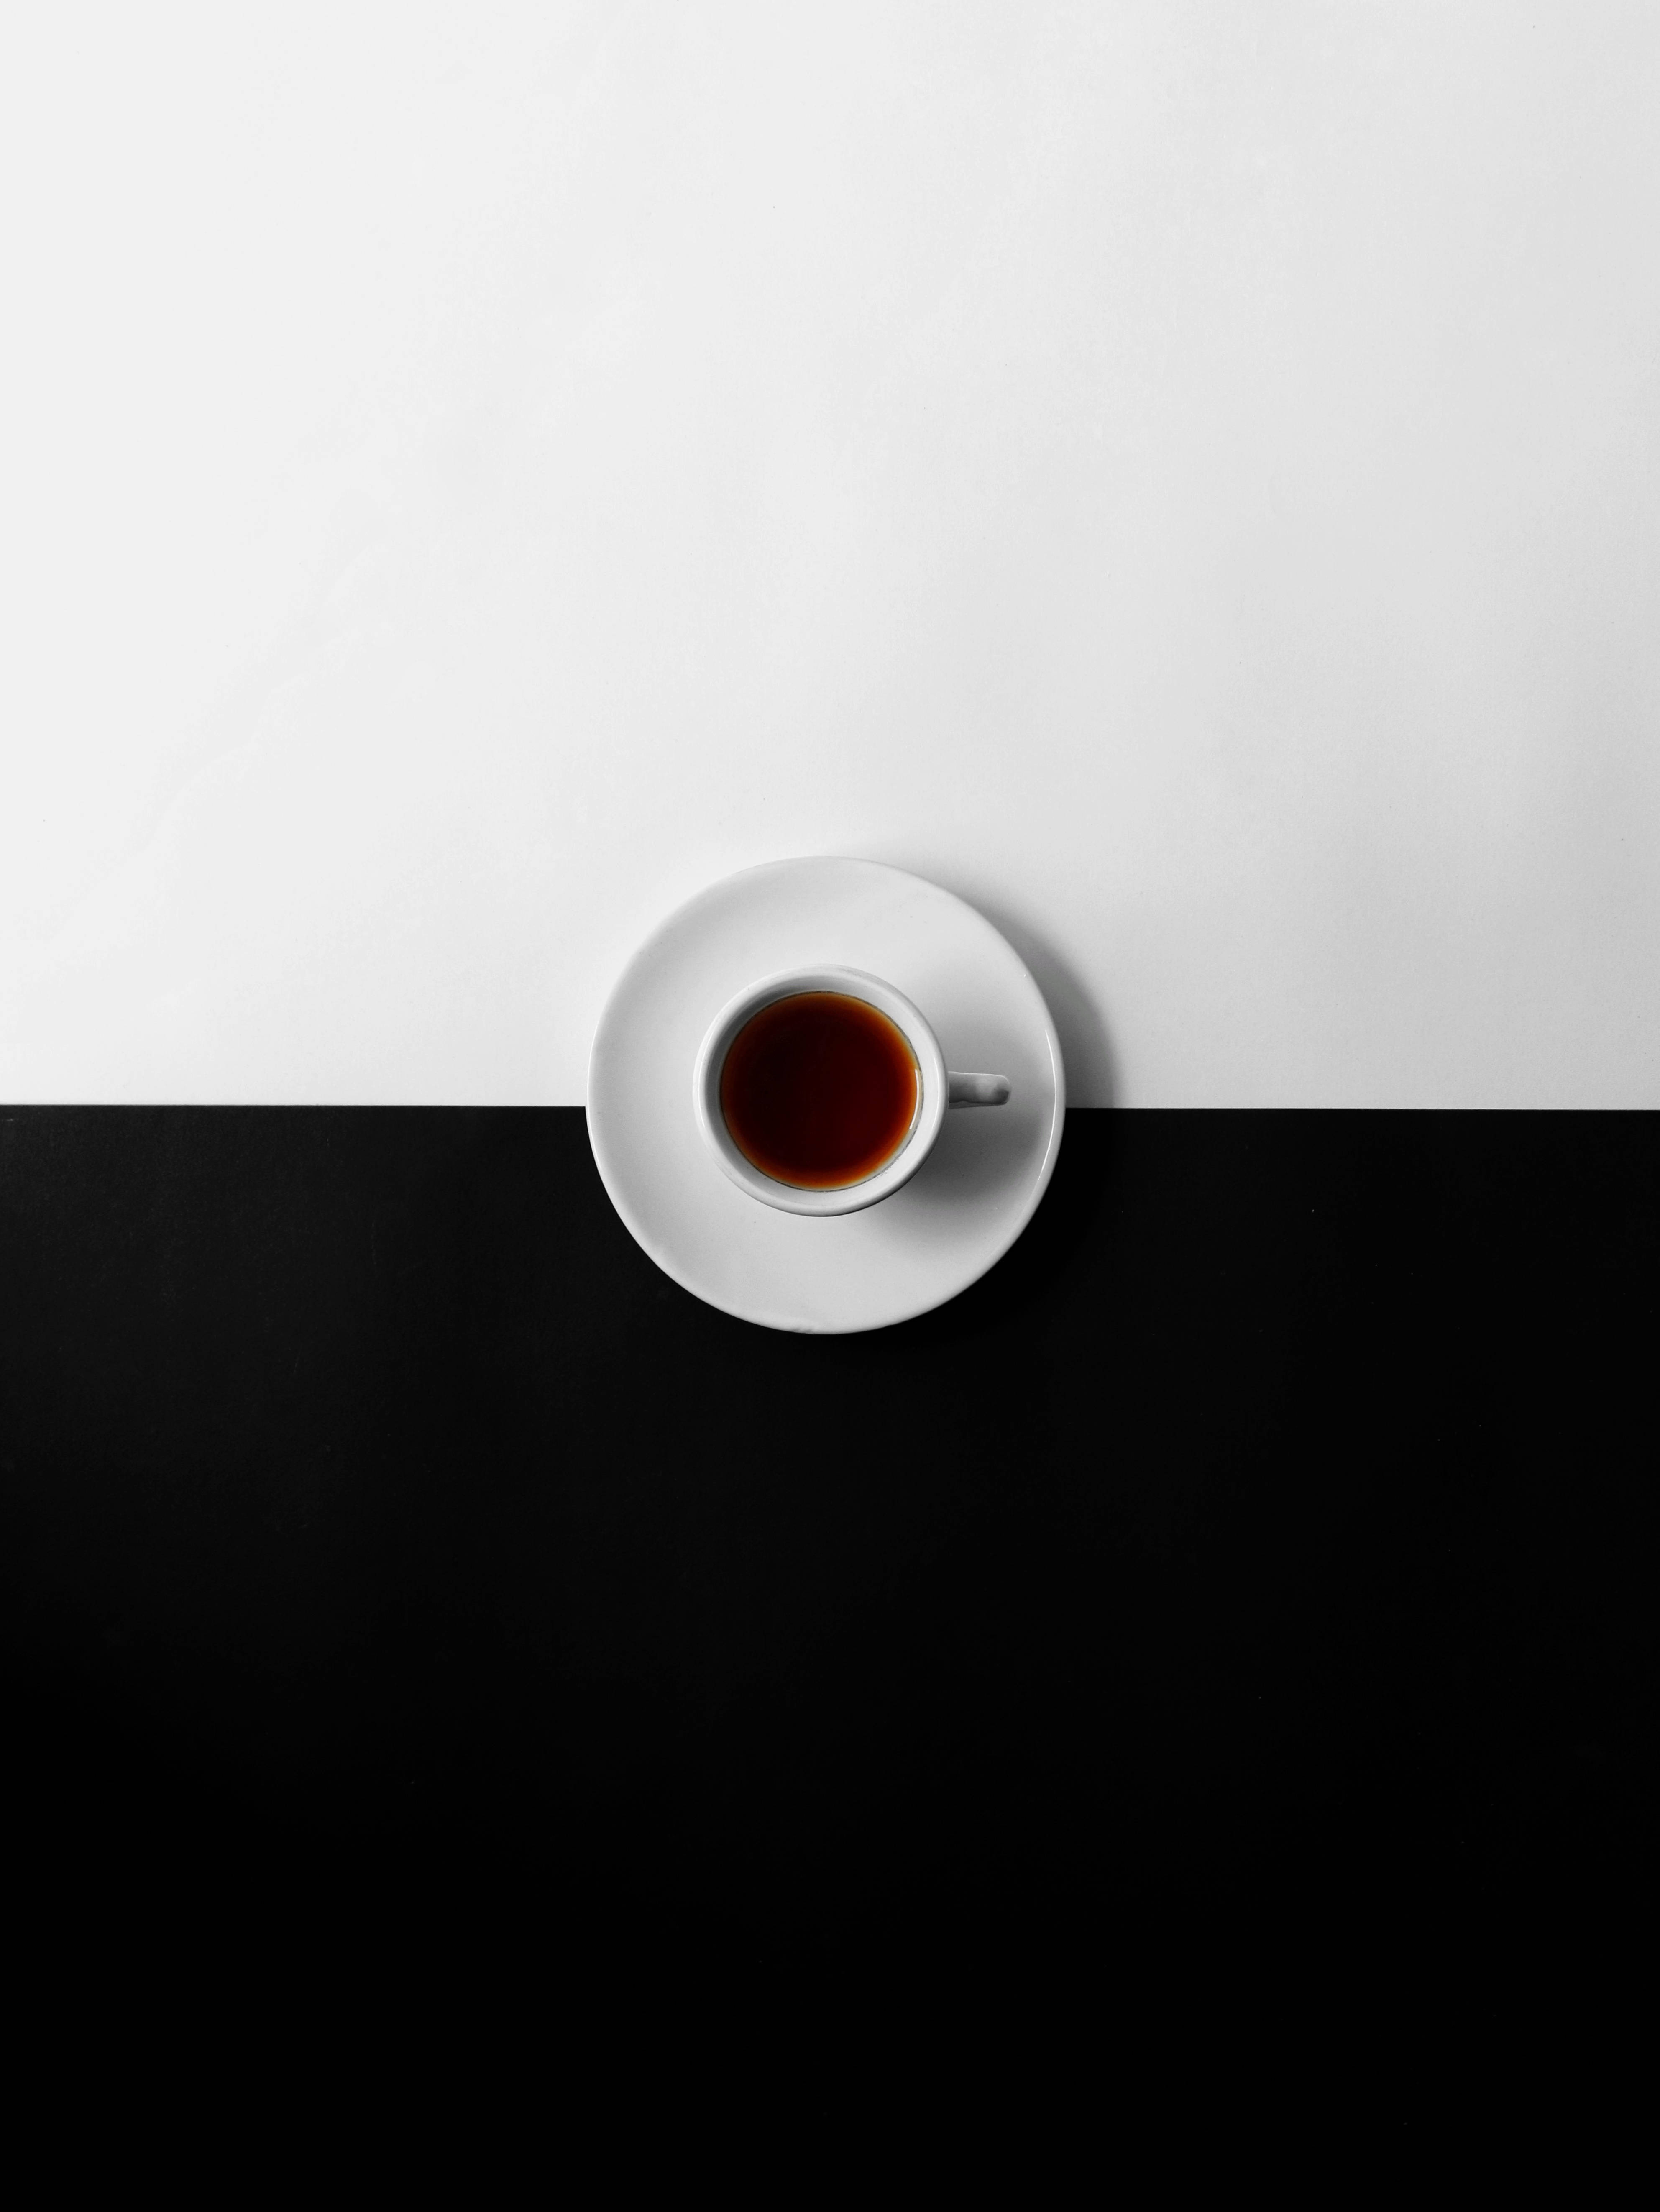 Download Minimalist Cup Of Coffee Wallpaper